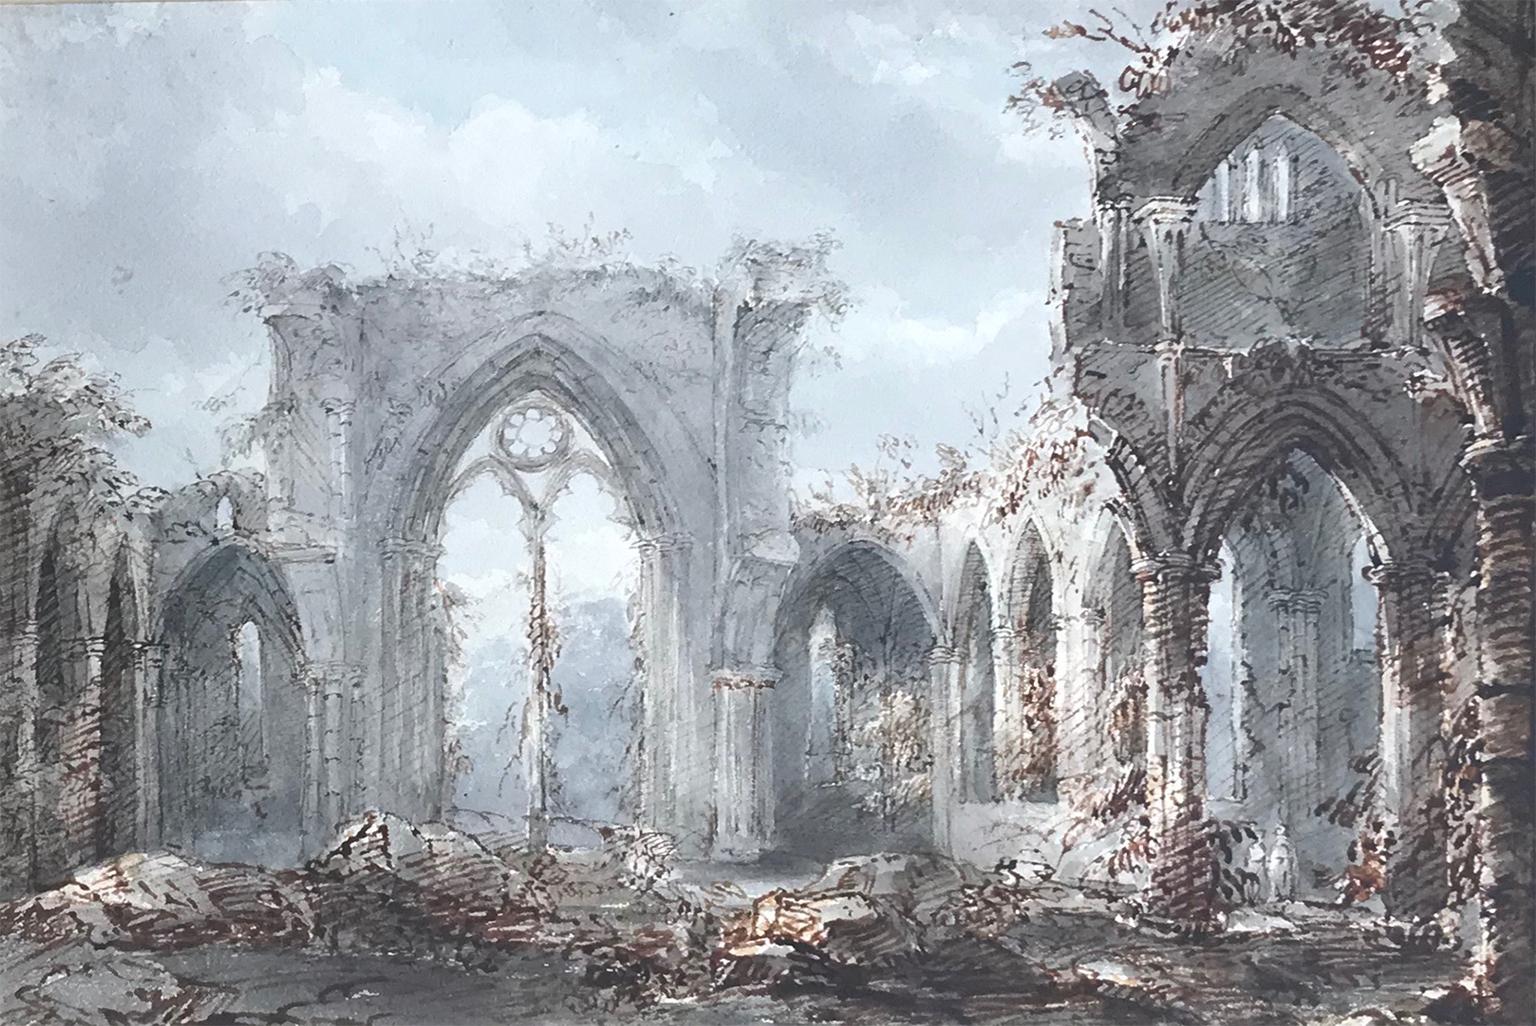 Unframed 7.5 x 8.25 in (18.5 x 23.5 cm). Framed: 13.65 x 14.75 in (34.5 x 38 cm)

This charming early nineteenth century drawing captures the evocative, ruined Netley Abbey. Executed in pen, brown ink and wash over traces of pencil, it is inscribed